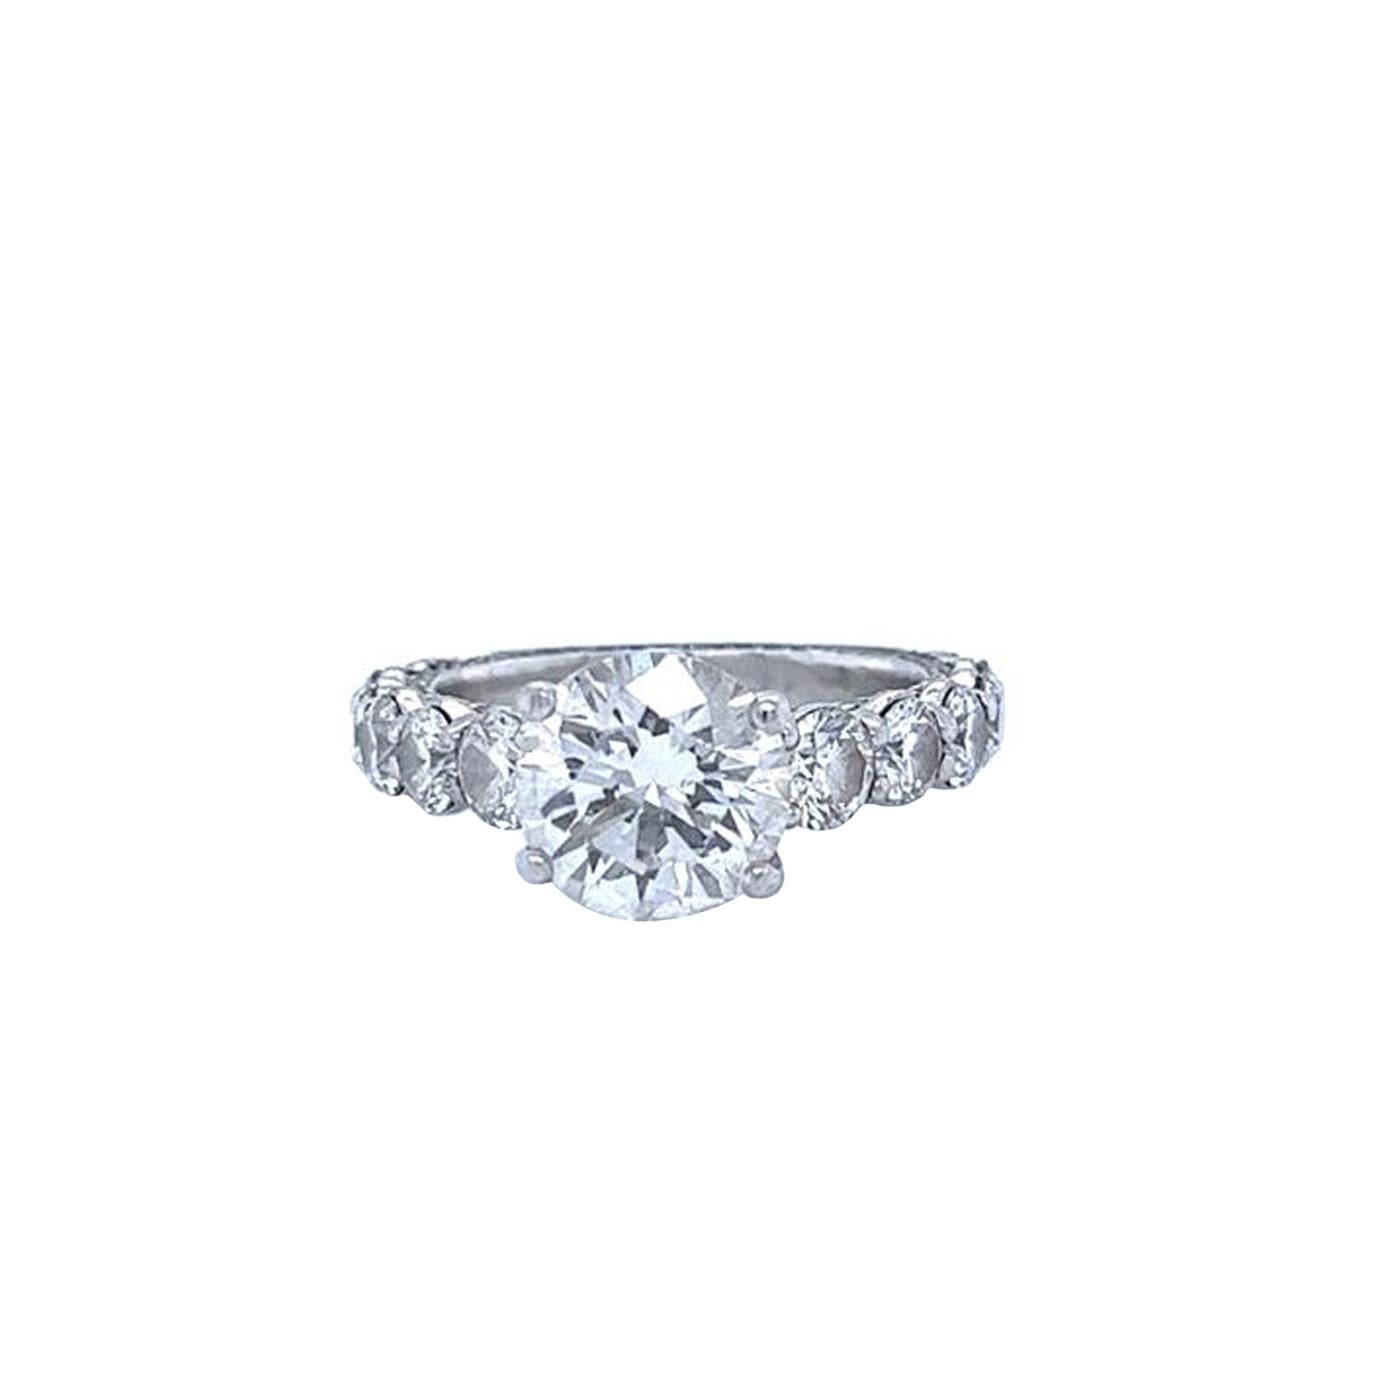 This beautiful Eternity Natural Diamond Ring Features a 2.70-carat center-round Round Cut Diamond Crafted in Platinum. It has Round cut diamonds, a VS1 / VS2 Clarity grade with K Color, GIA certified with Very Good polish, and Very Good Symmetry.